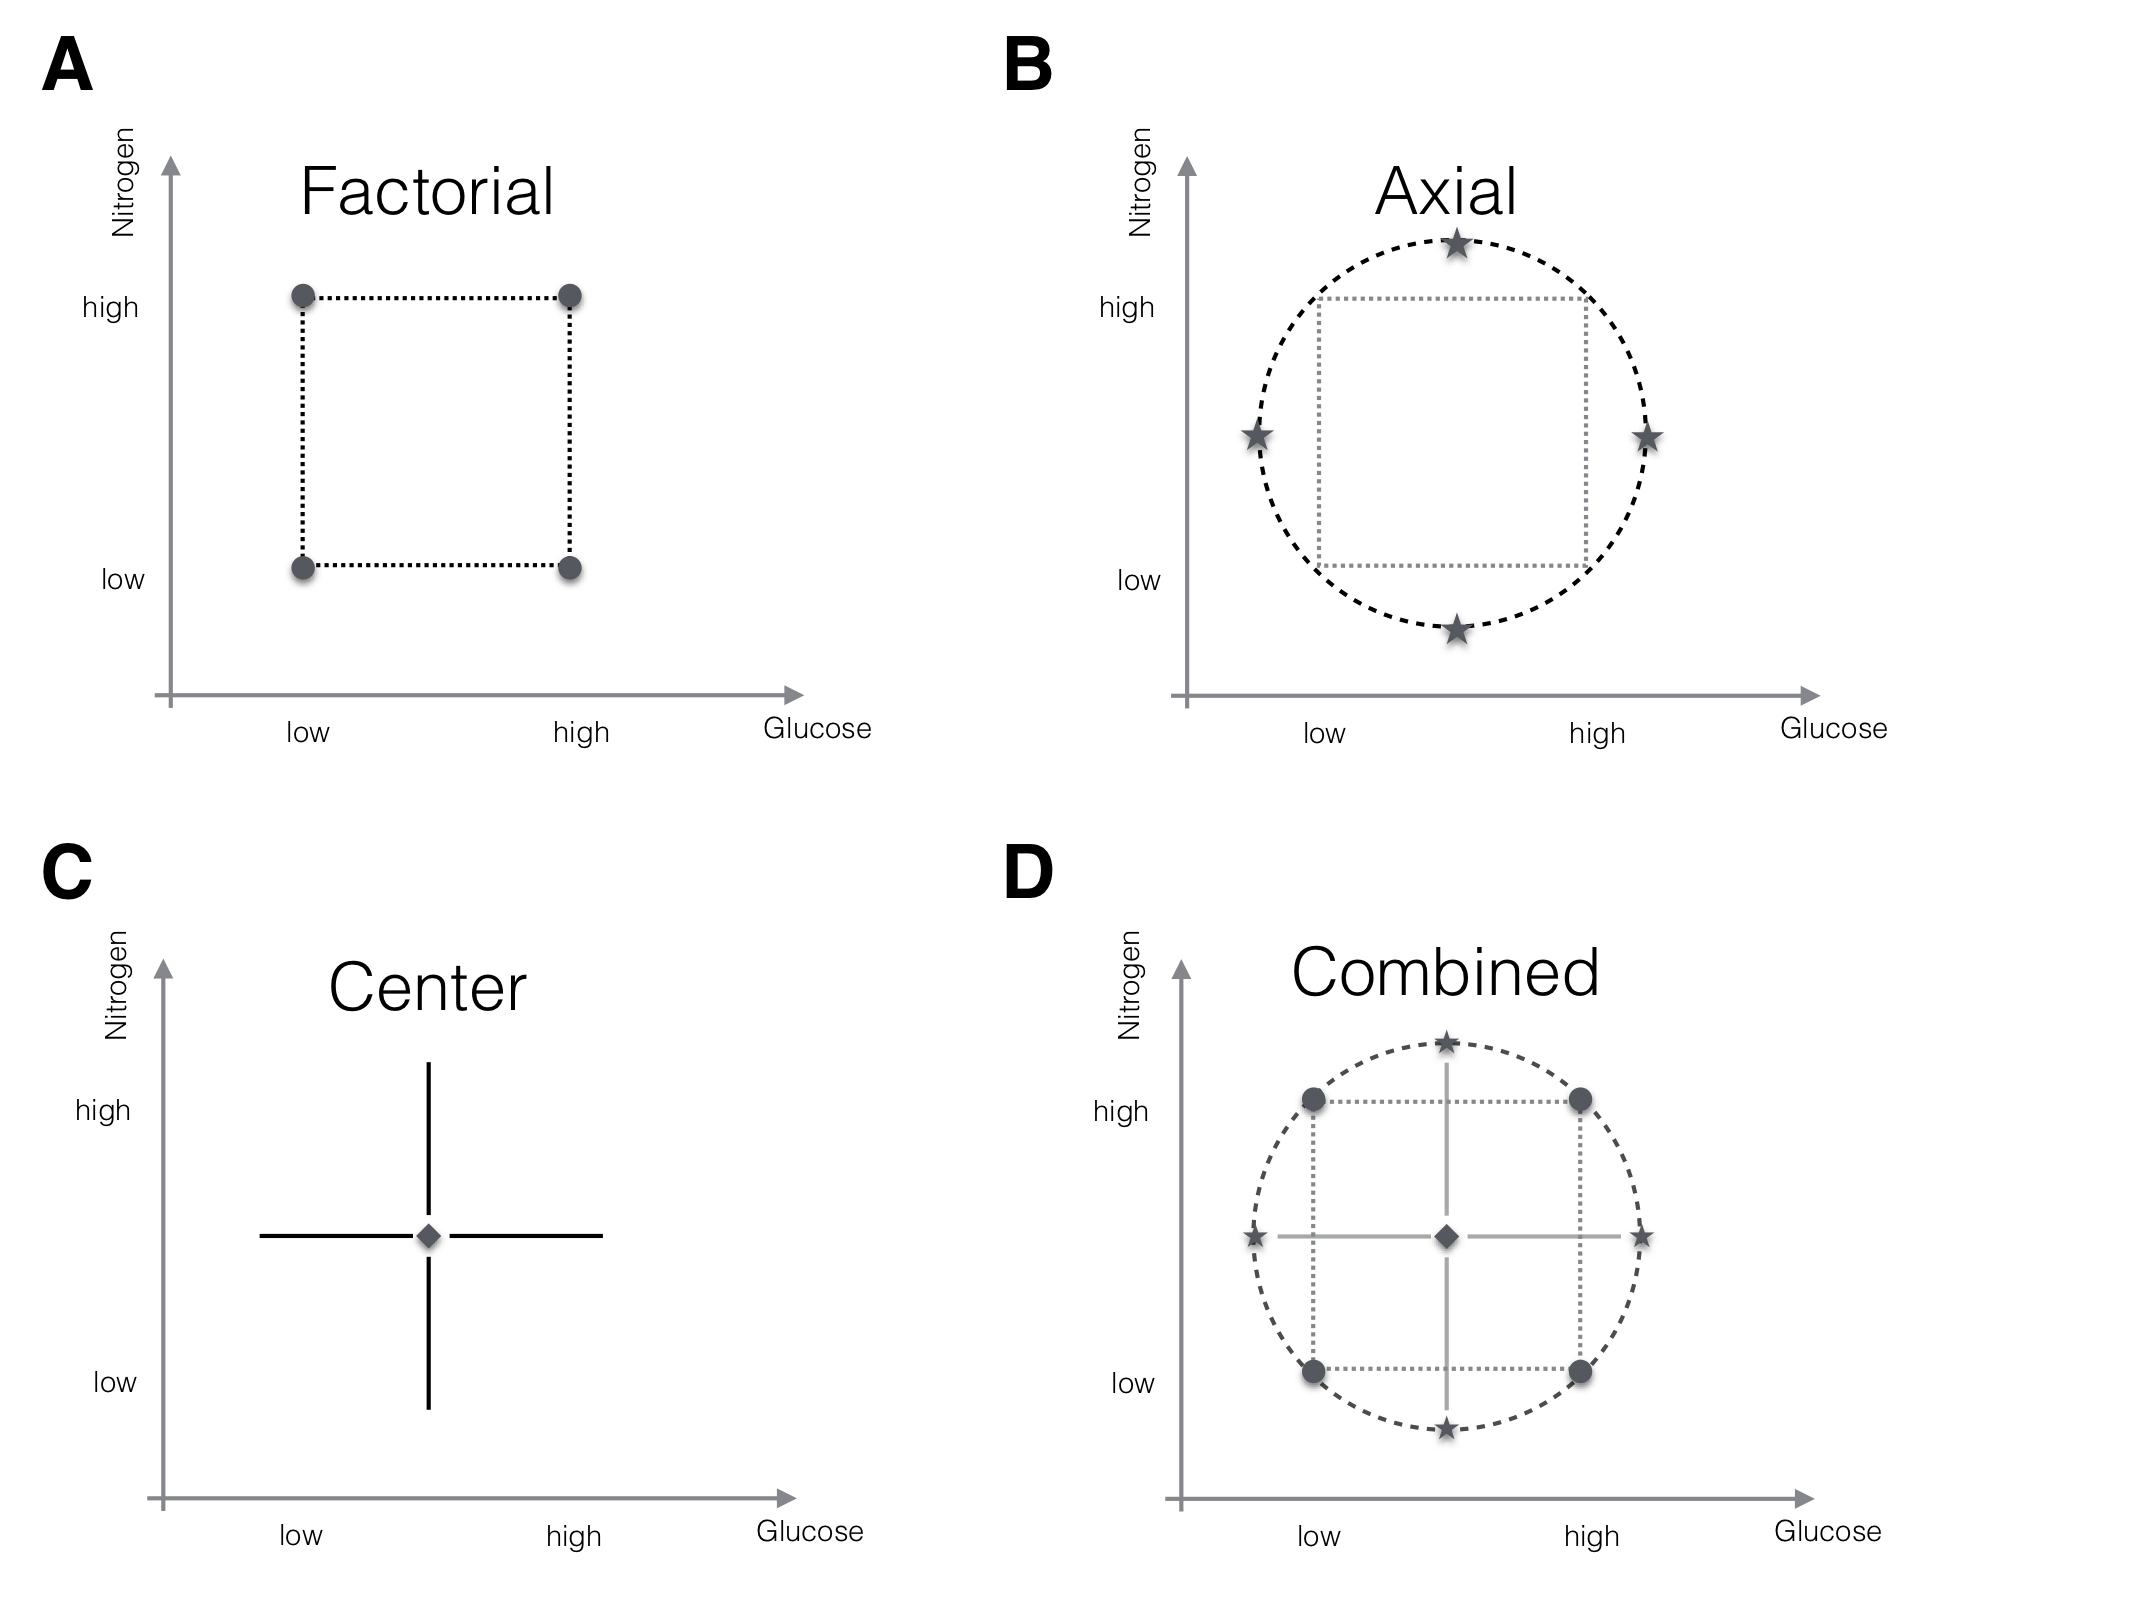 The components of a center composite design for two factors. A: (Fractional) factorial points for interactions. B: Axial points for quadratic effects. C: Center points for variance estimation. D: The full CCD design.